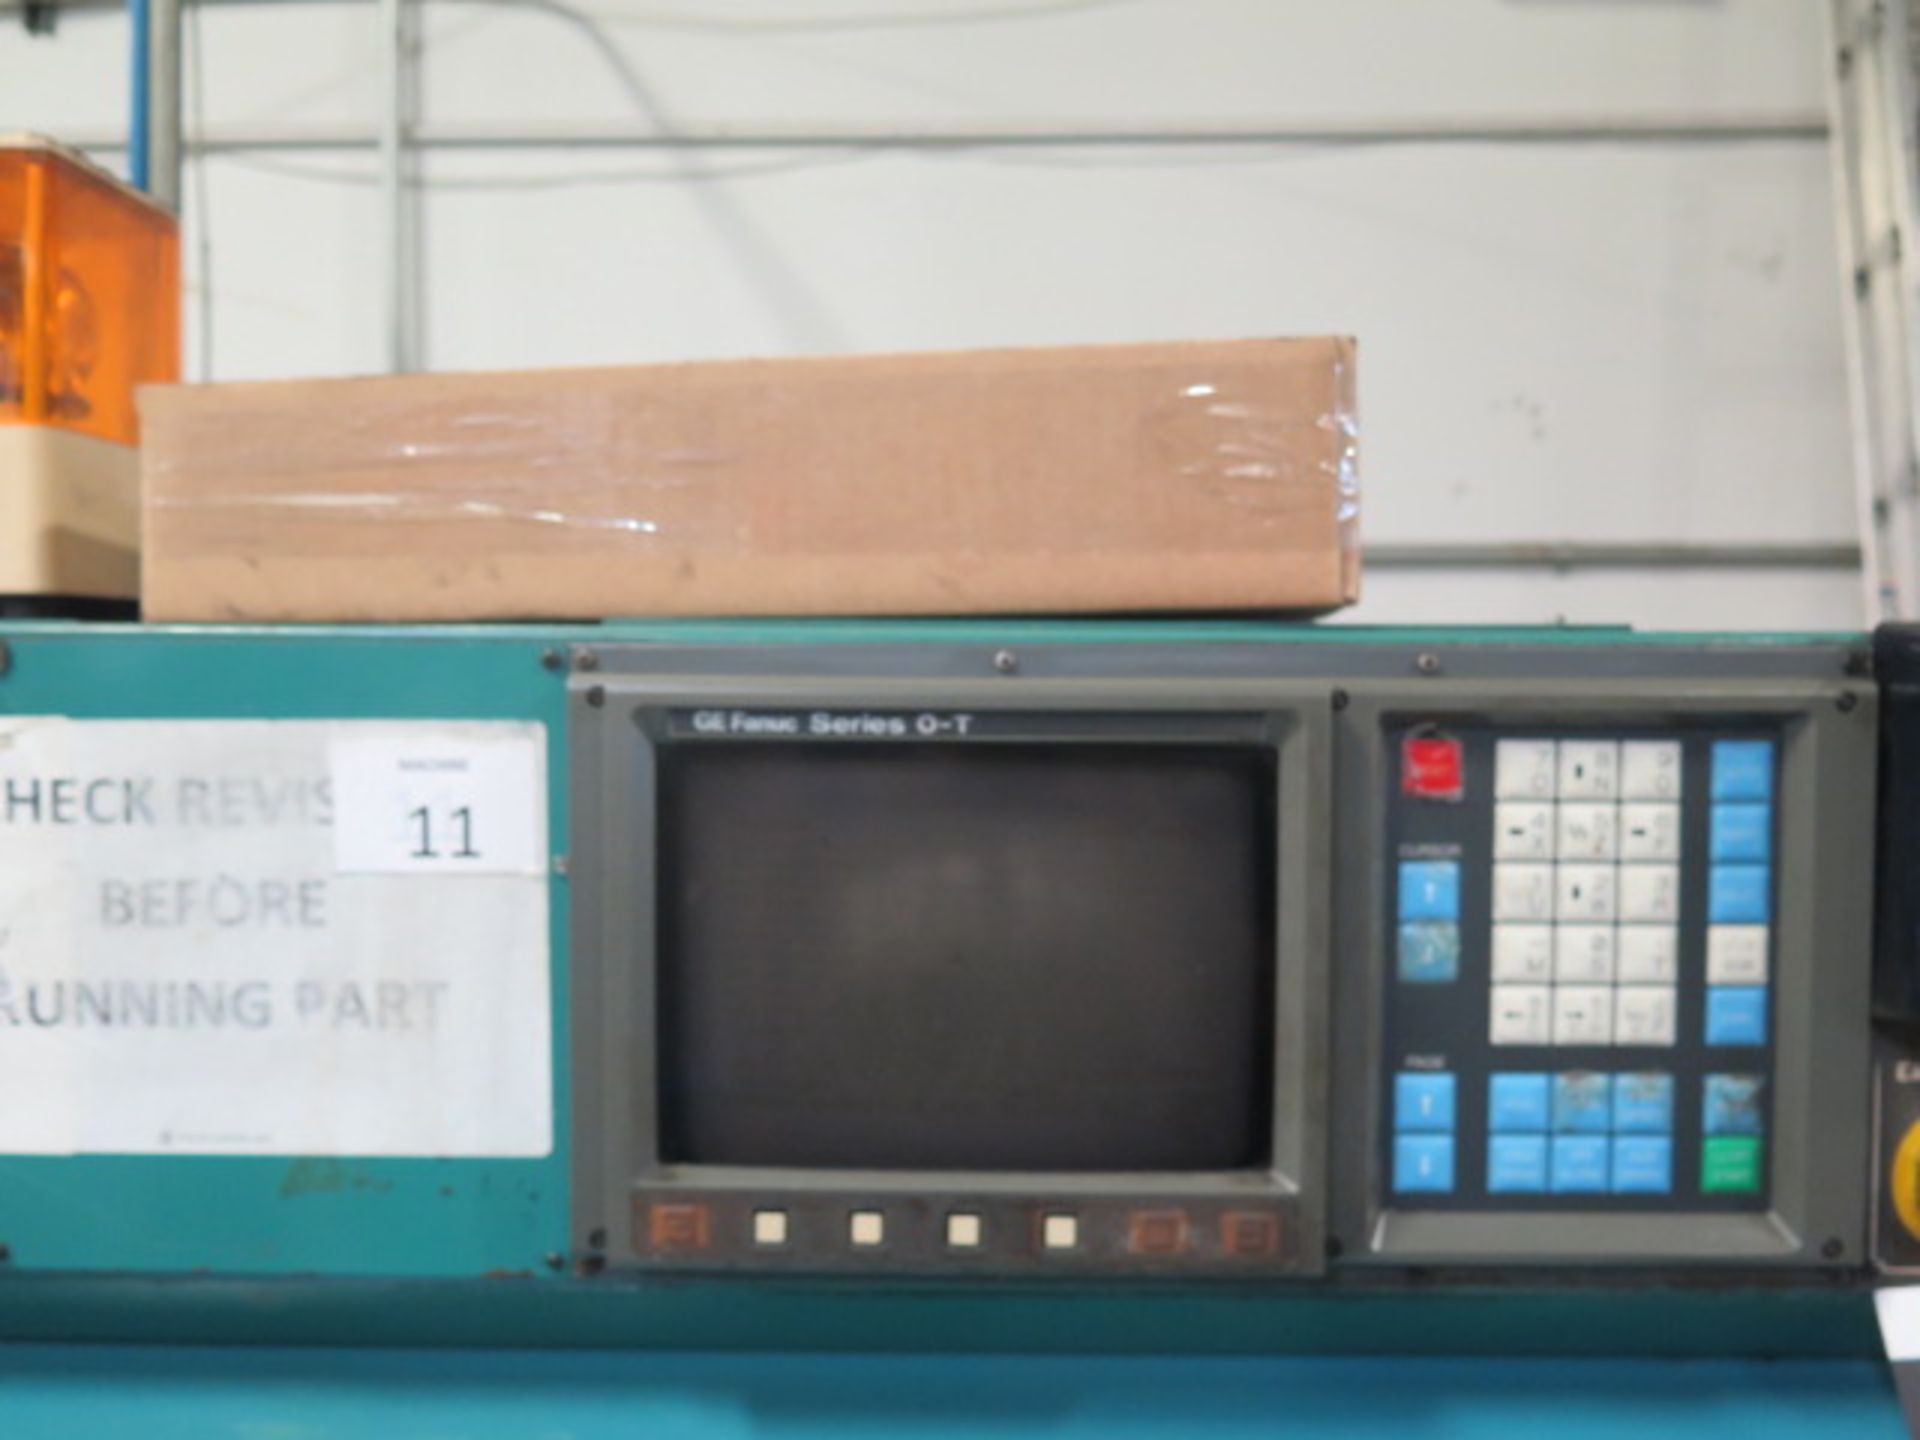 Nakamura Tome TMC-15 CNC Turning Center s/n E04101 w/ Fanuc Series 0-T Controls, SOLD AS IS - Image 11 of 13